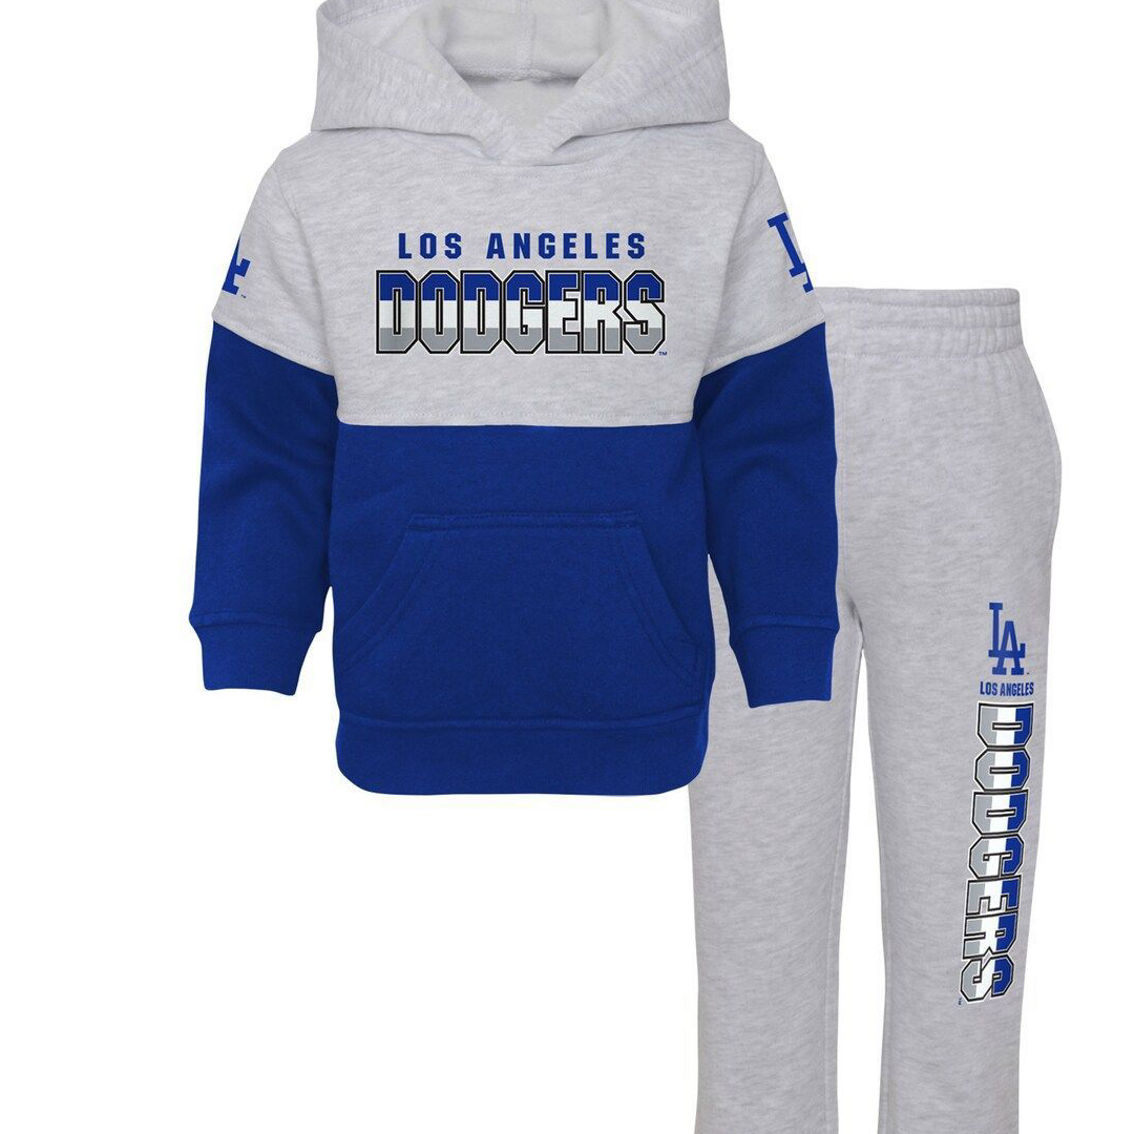 Outerstuff Infant Royal/Heather Gray Los Angeles Dodgers Playmaker Pullover Hoodie & Pants Set - Image 2 of 4